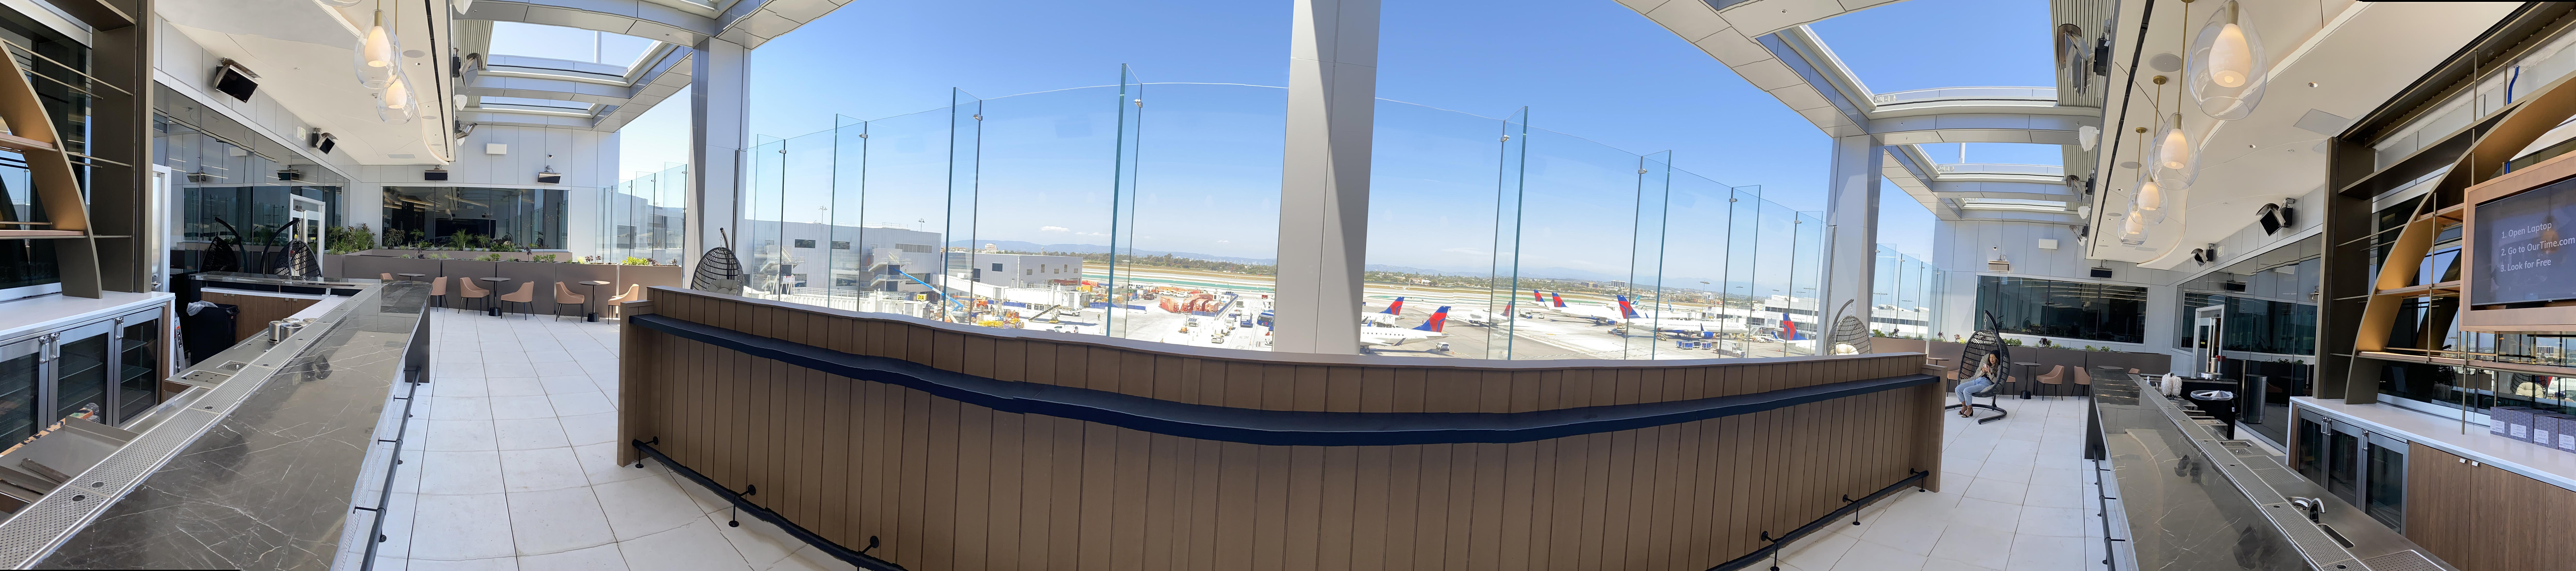 The Sky Deck is seen at the T3 Delta Sky Club airport lounge at Los Angeles International Airport (LAX).